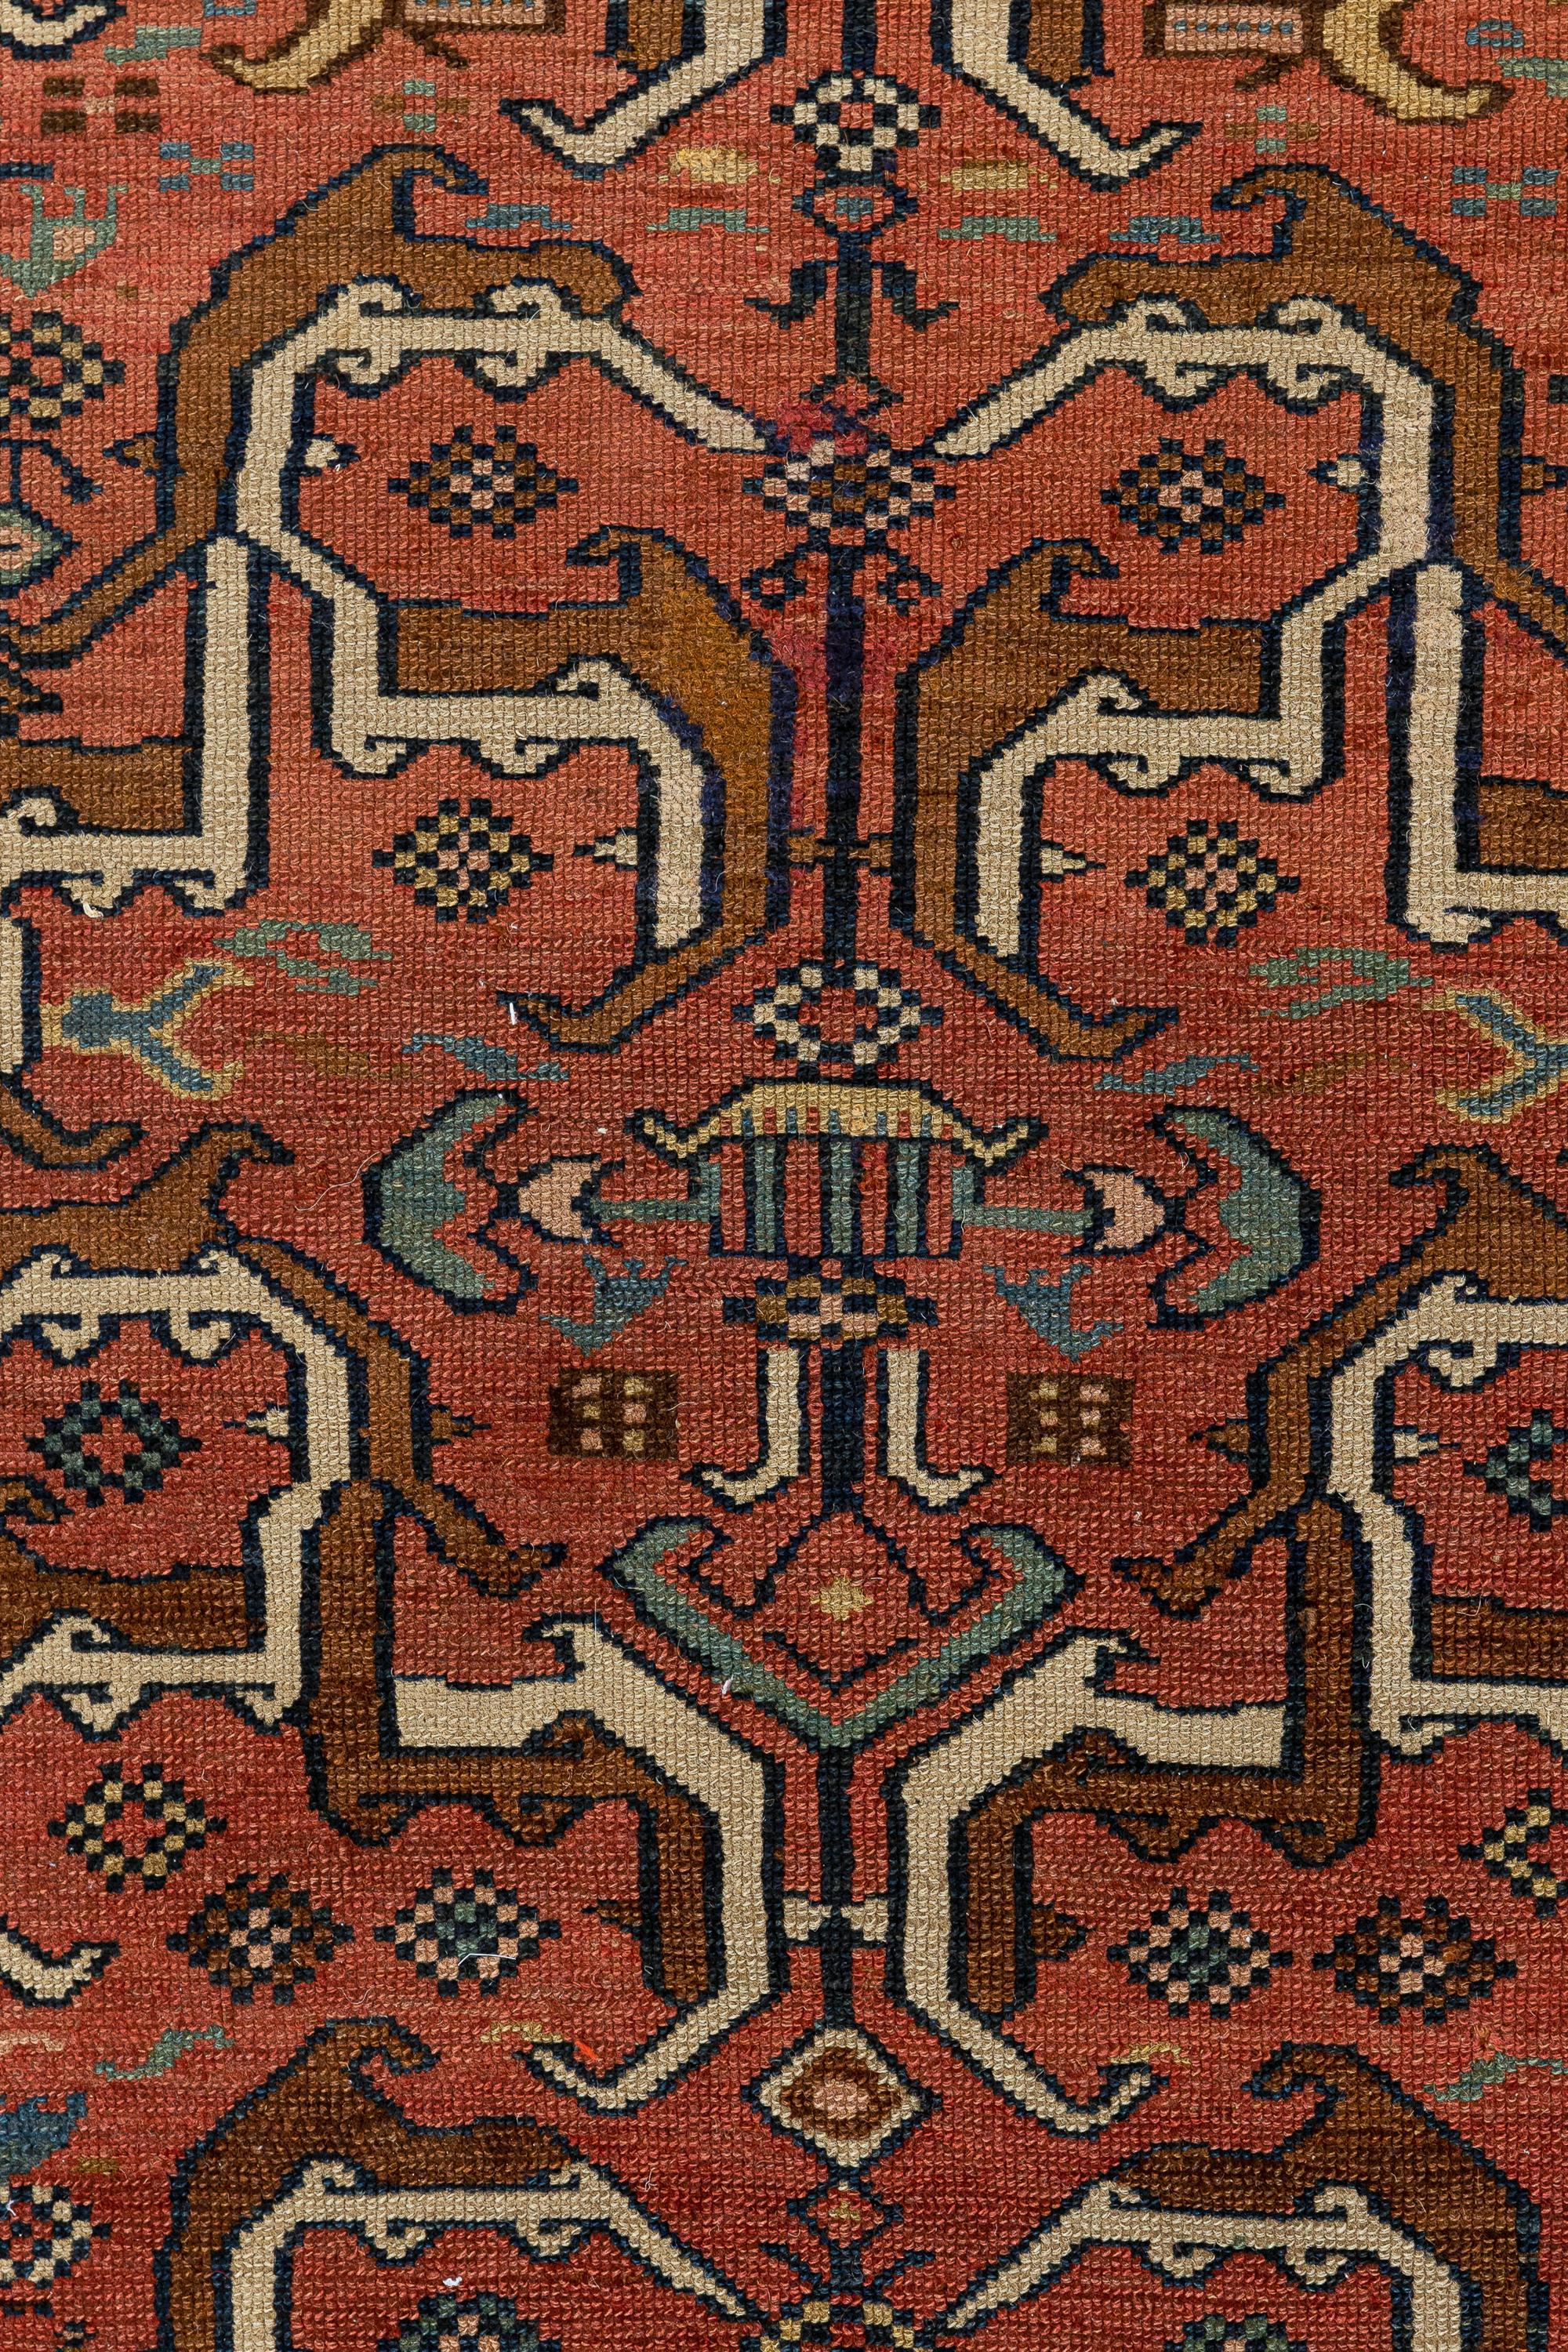 Northwest Persia

Stunning rug woven by a highly skilled artist in the late 19th century. The rug features a geometric pattern inspired by traditional designs from Northwestern Persia. The main field in cinnamon colour is covered by spaced geometric